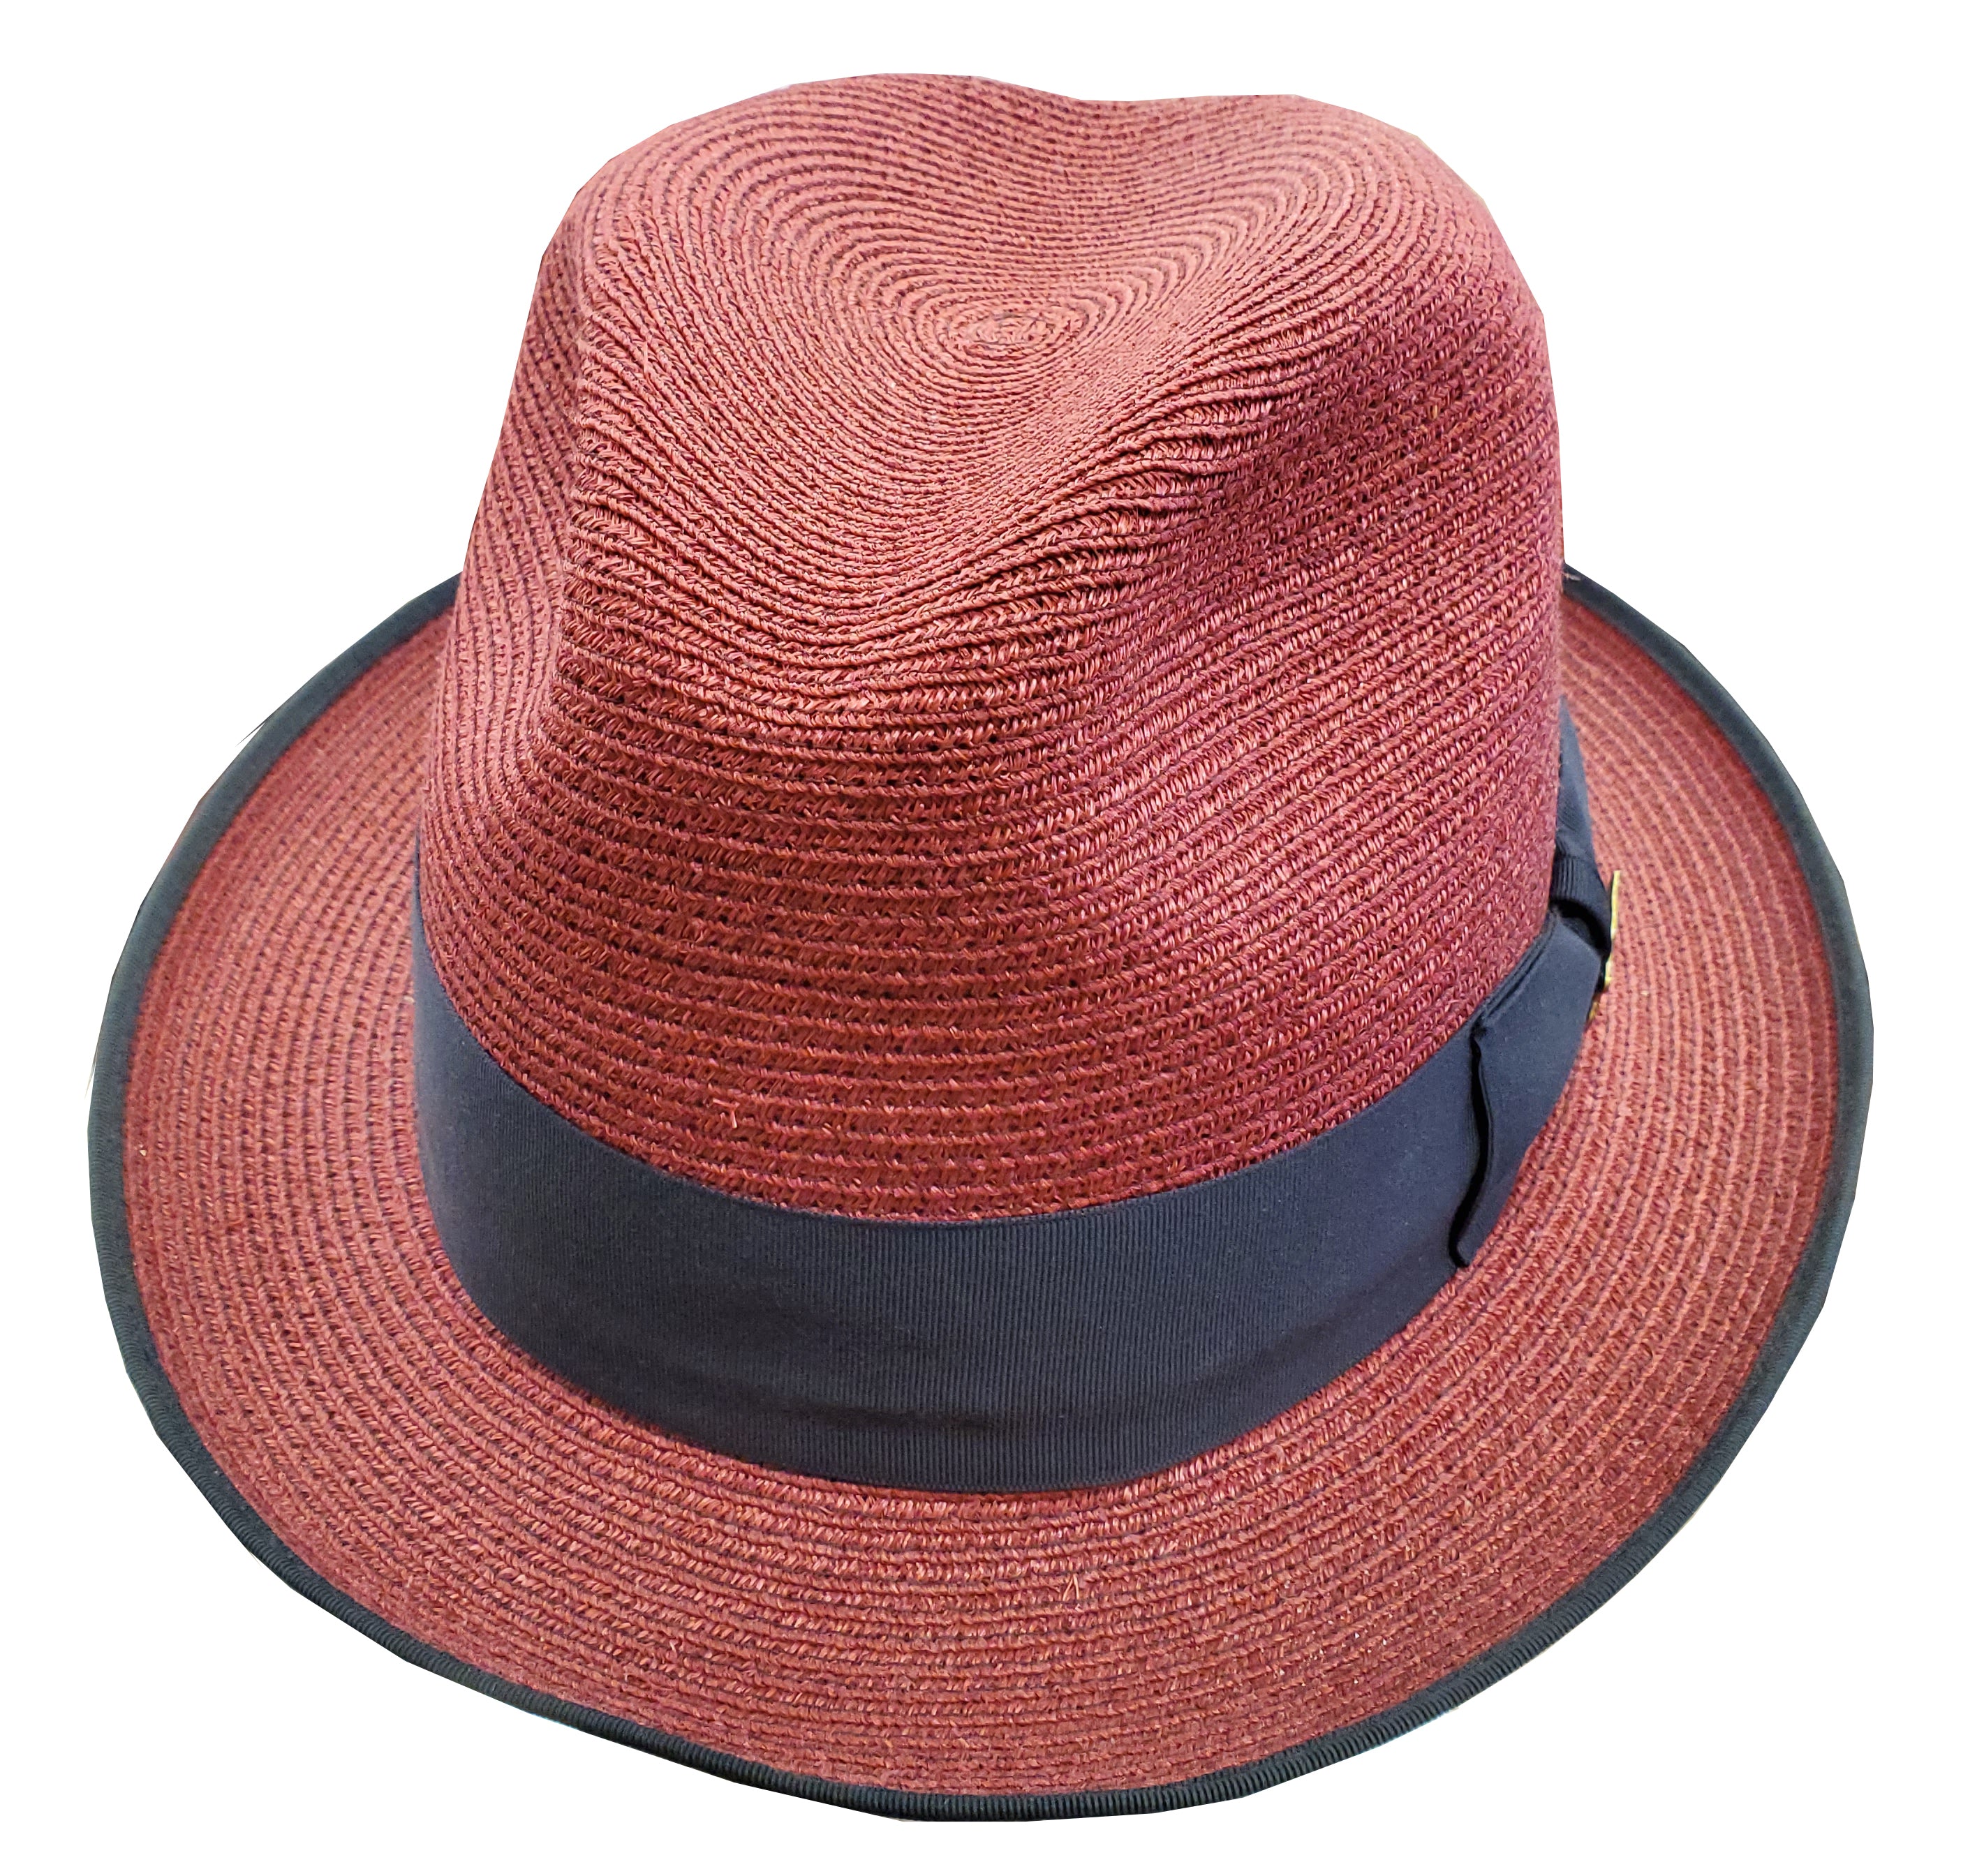 Biltmore Park Ave. Milan Straw Hat – Sid's Clothing and Hats